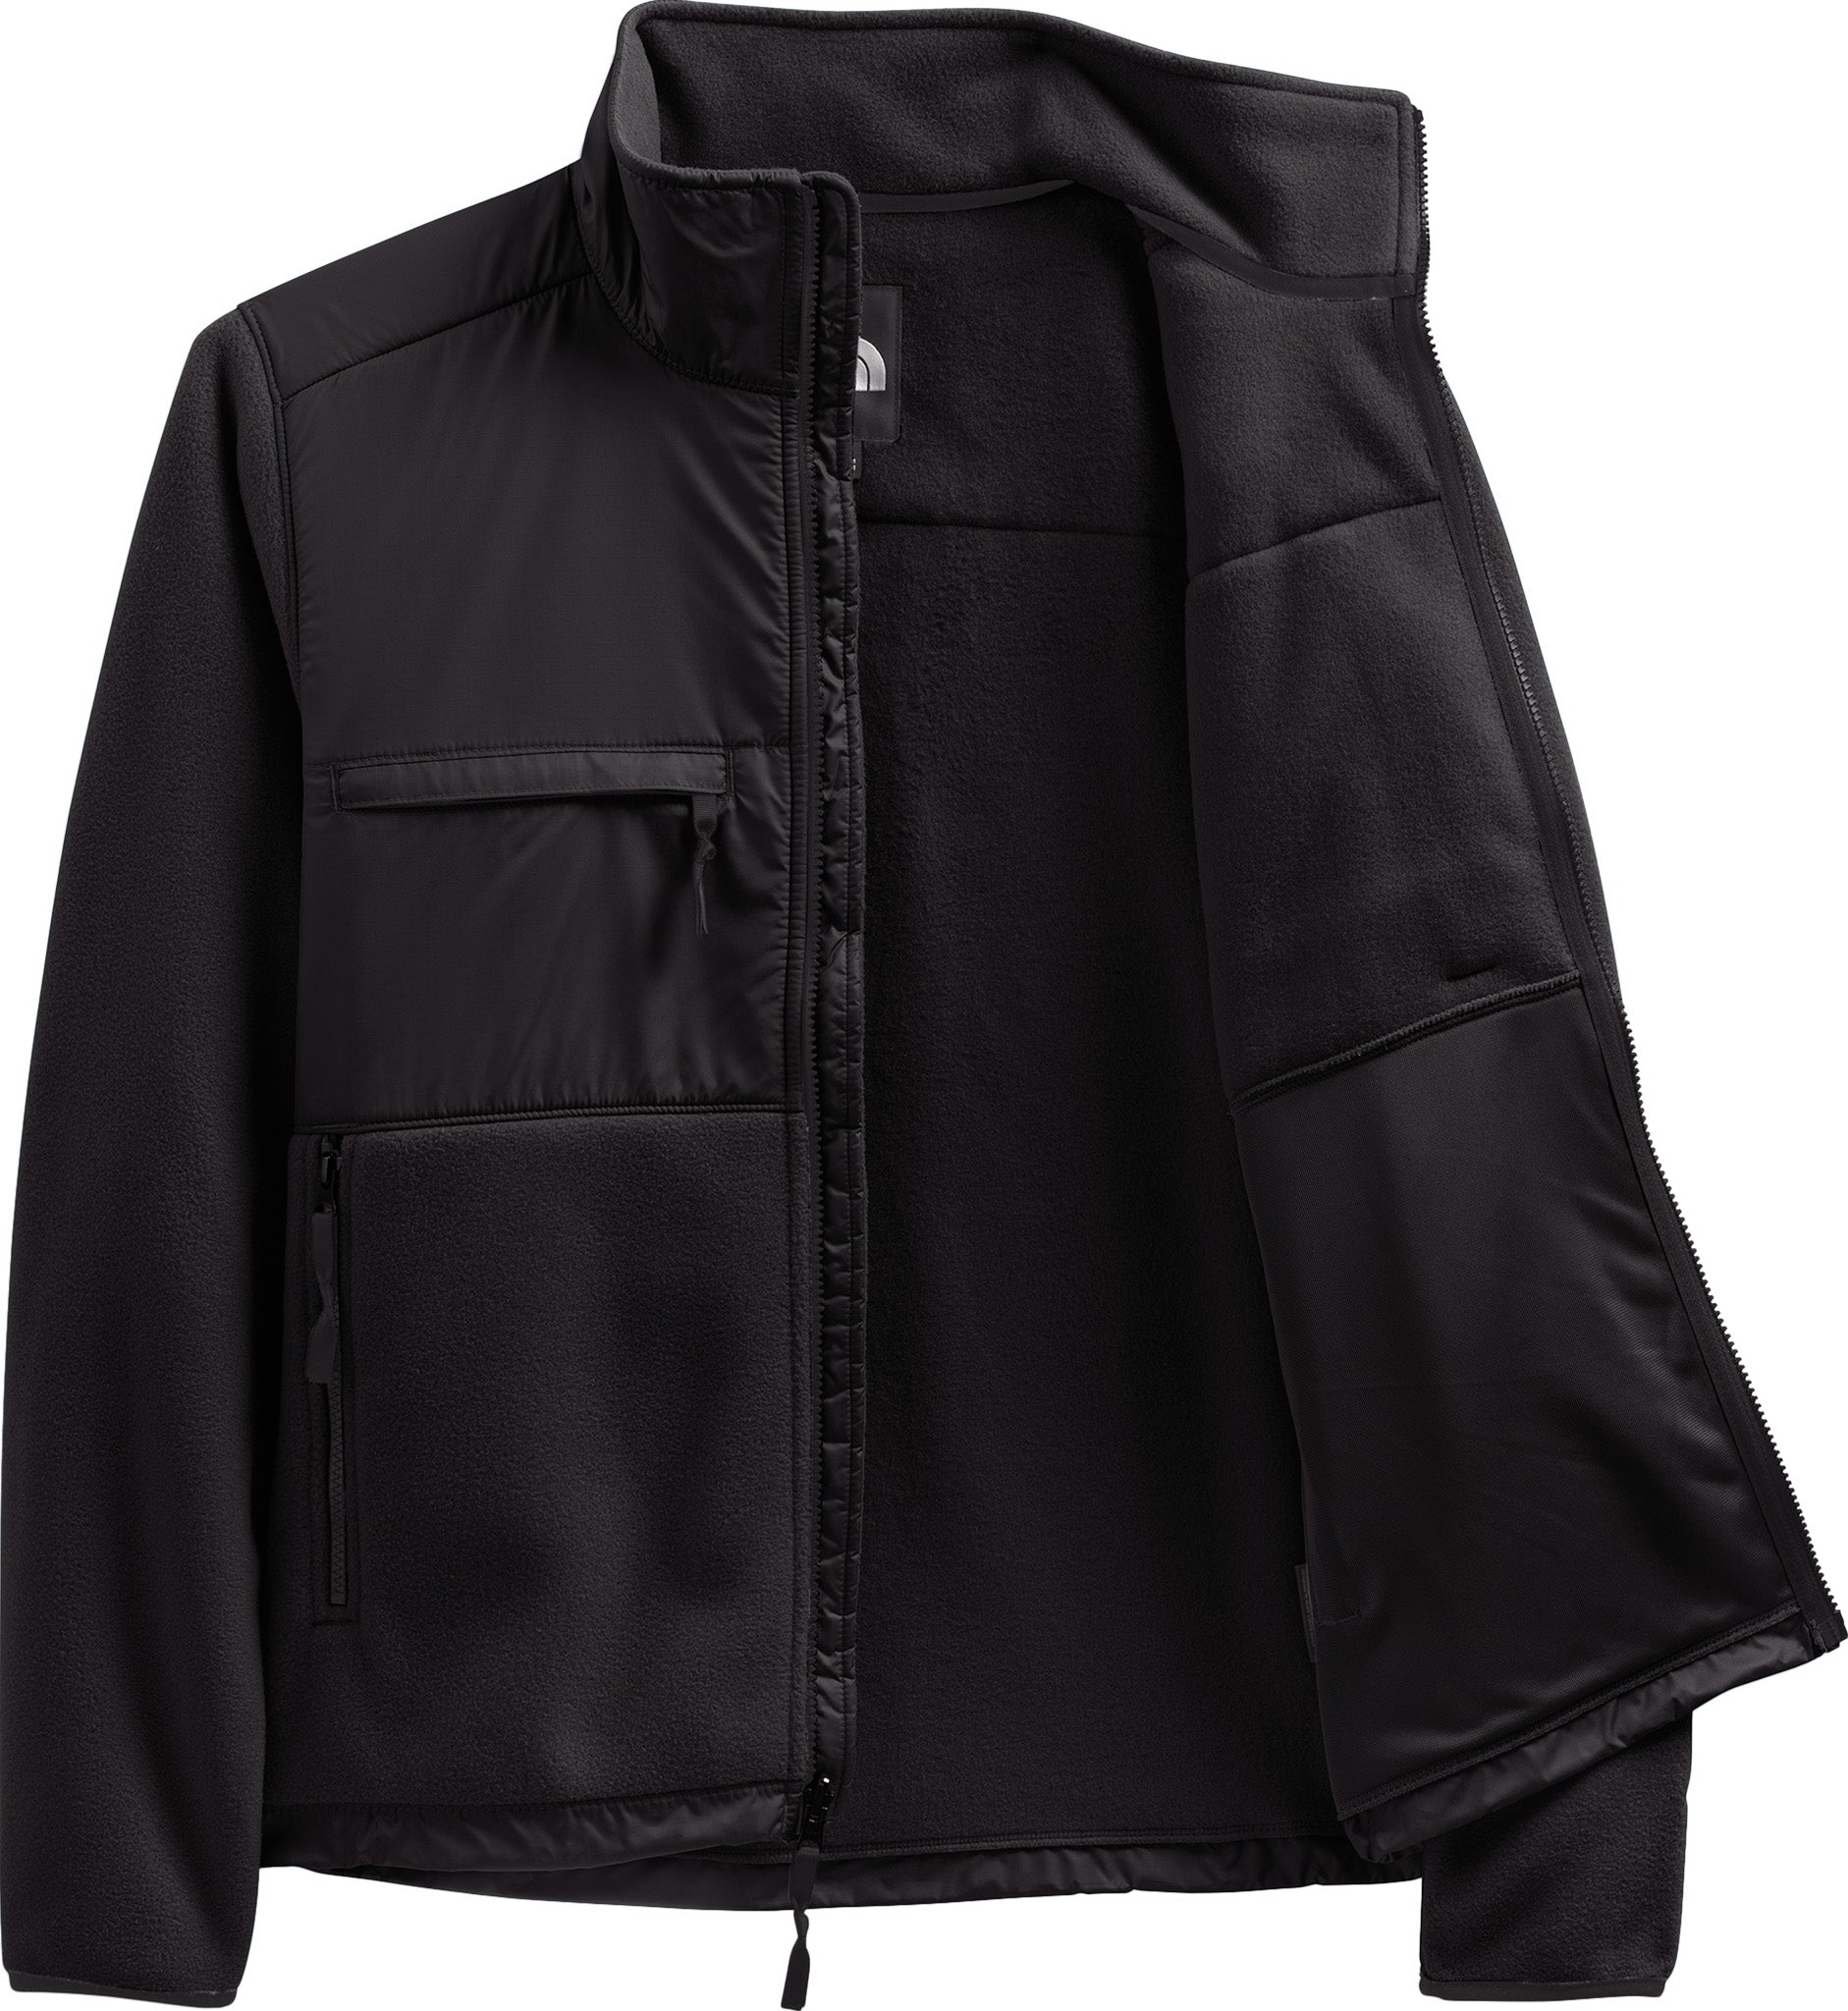 The North Face Denali Hoodie Men's Jacket – NYCMode